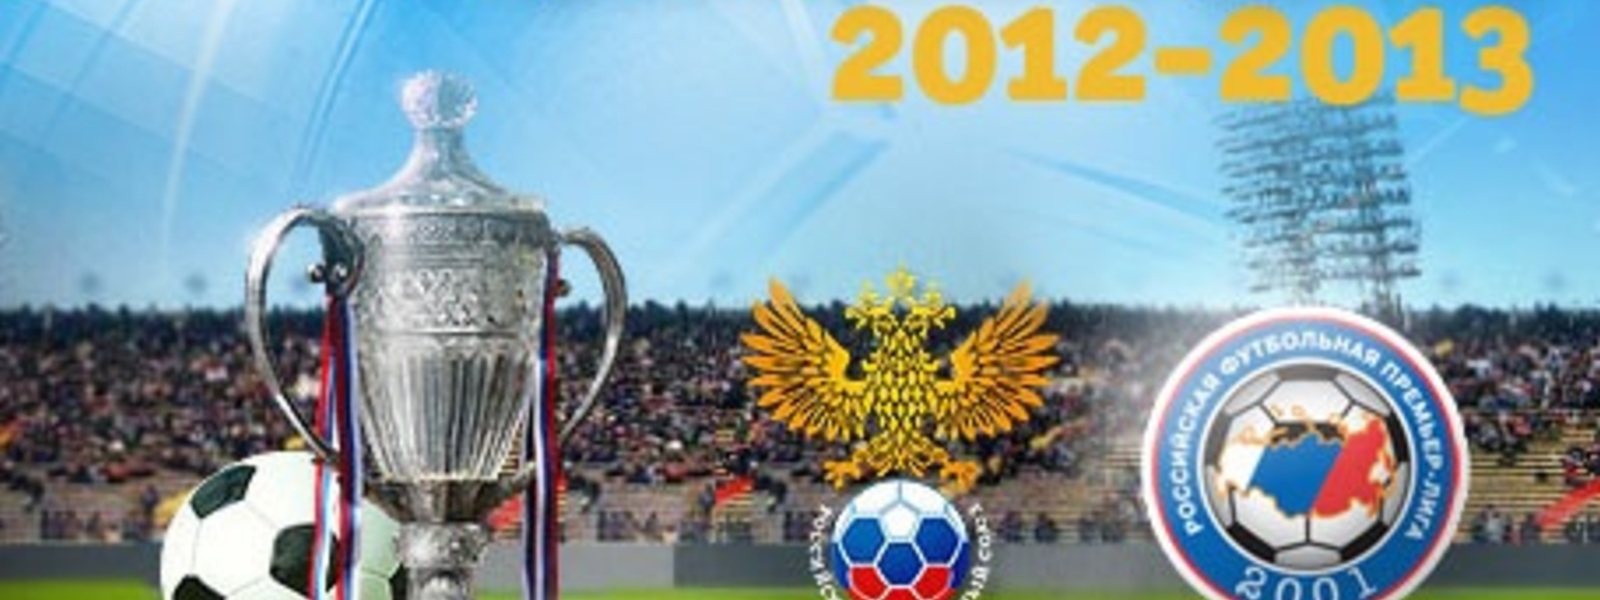 Very big cup russia2012 2013